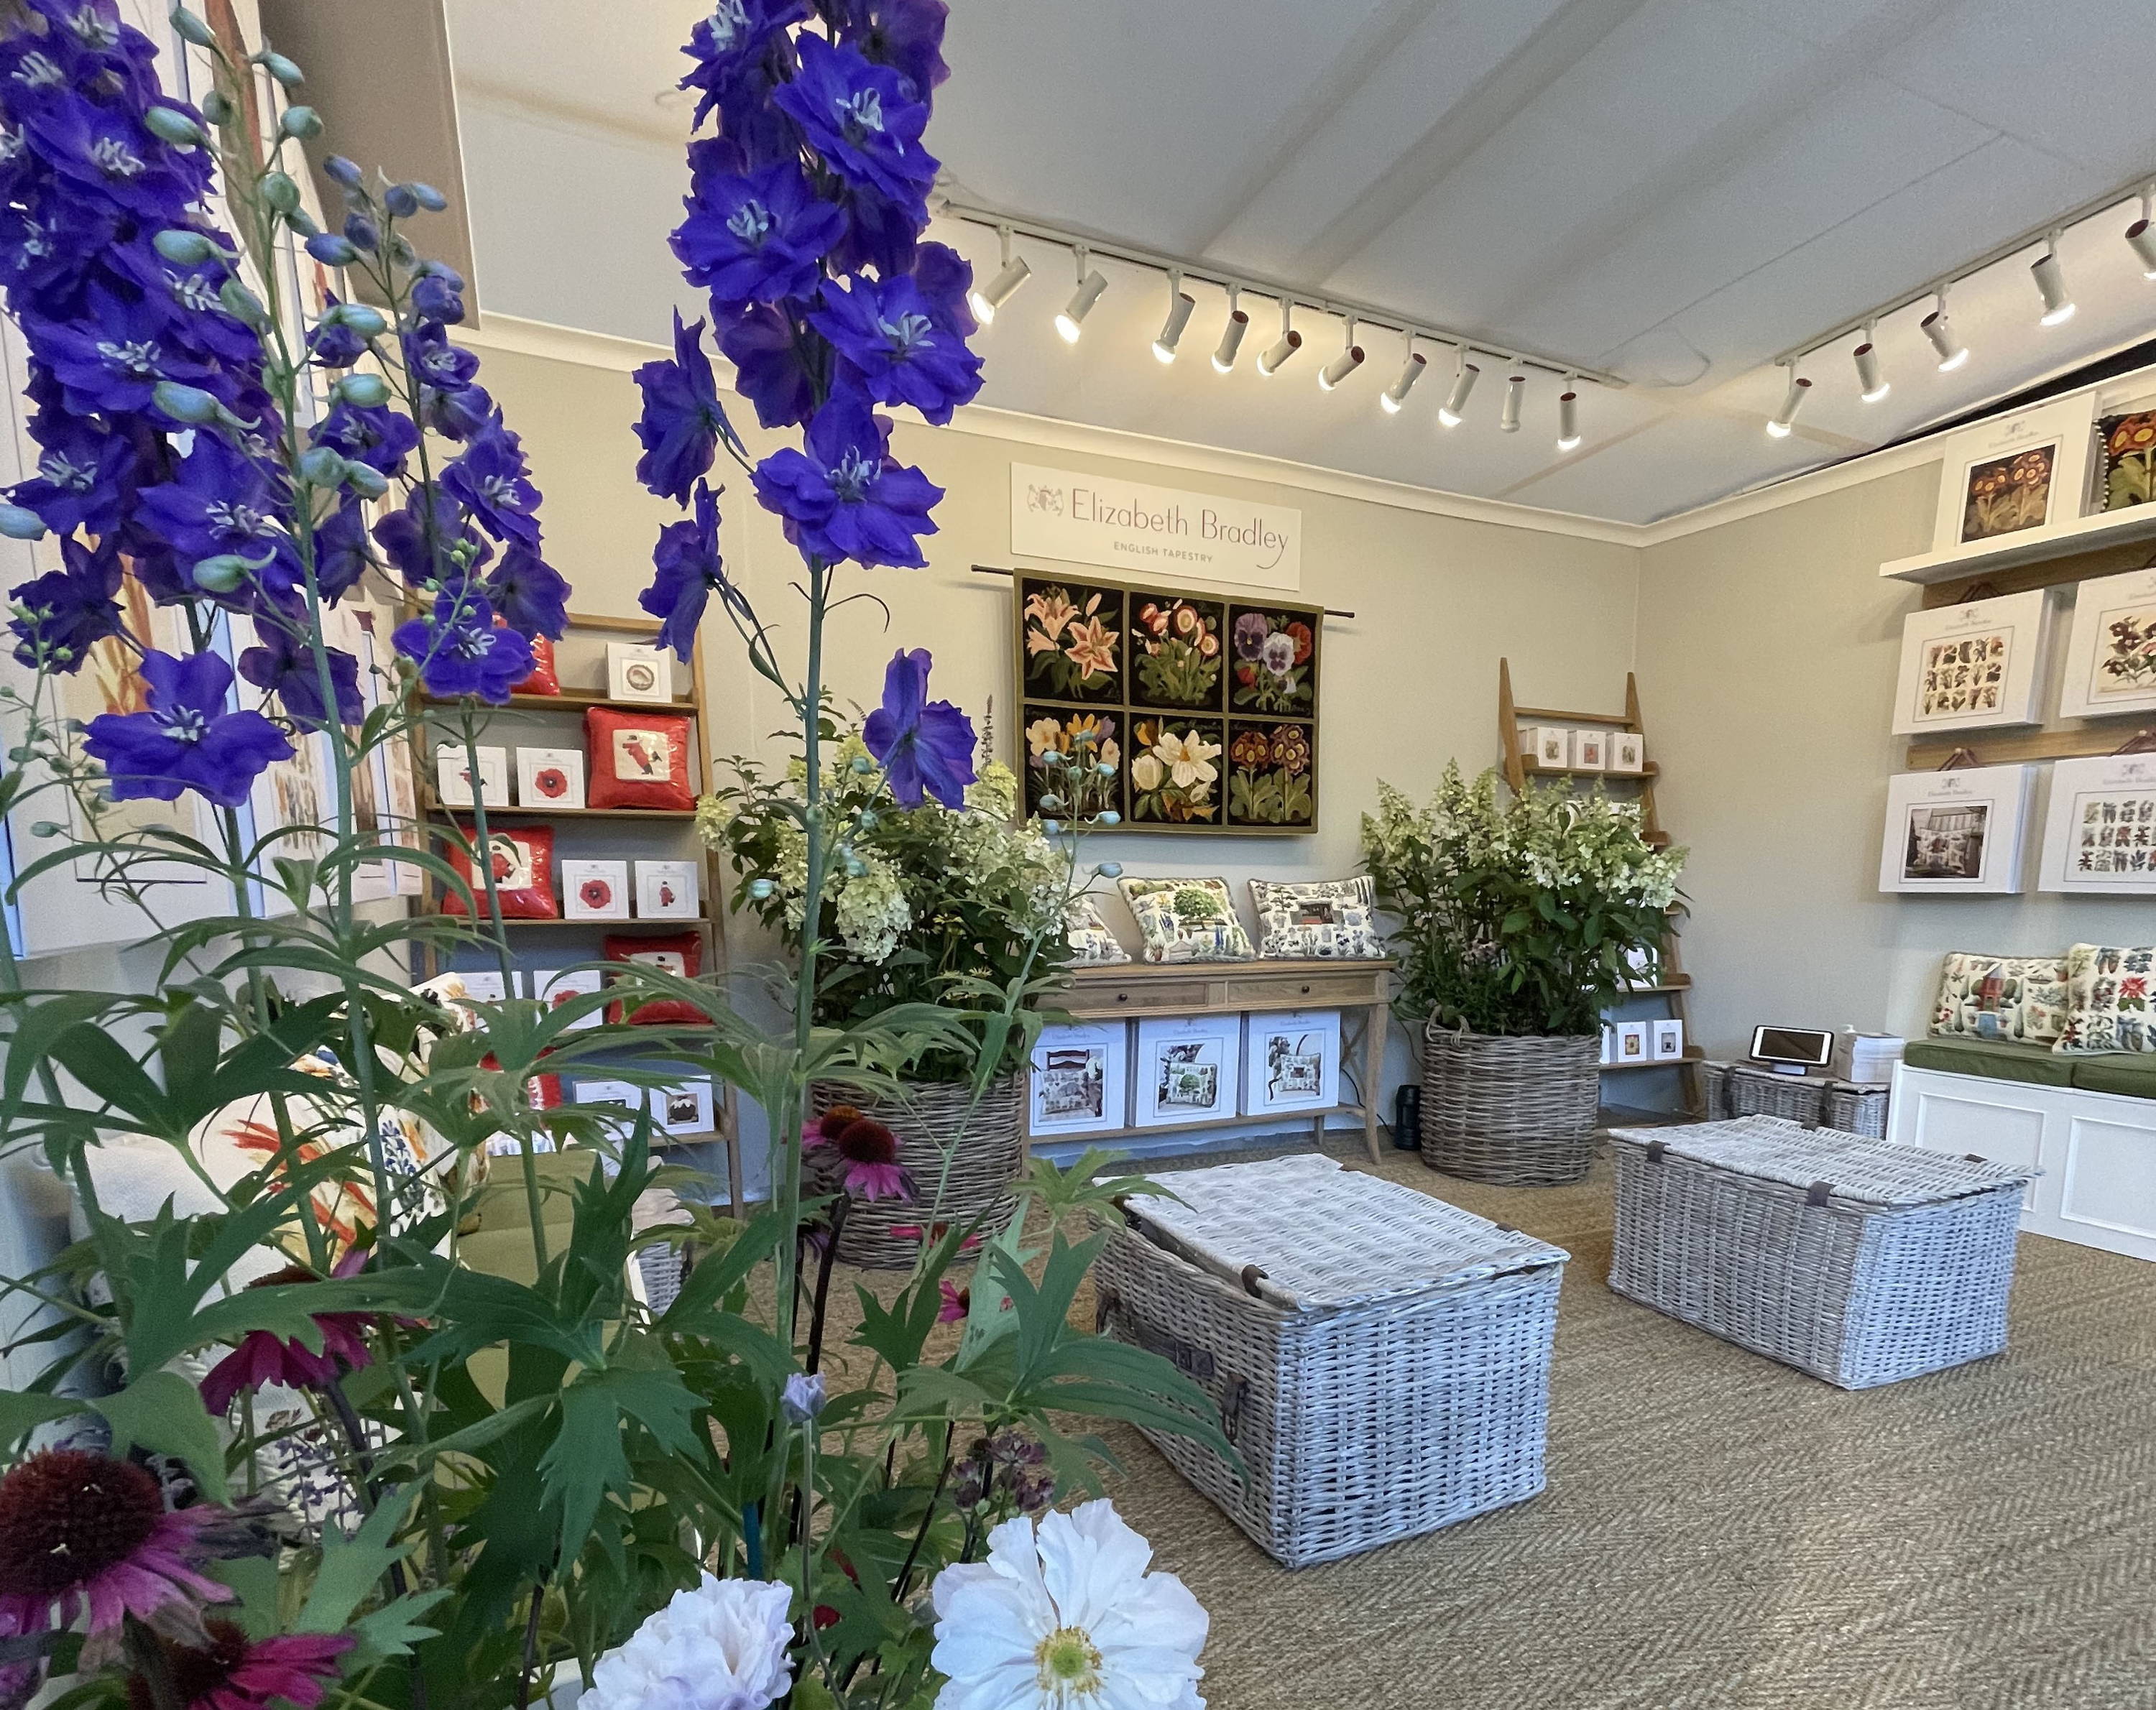 The 2021 Chelsea Flower Show booth